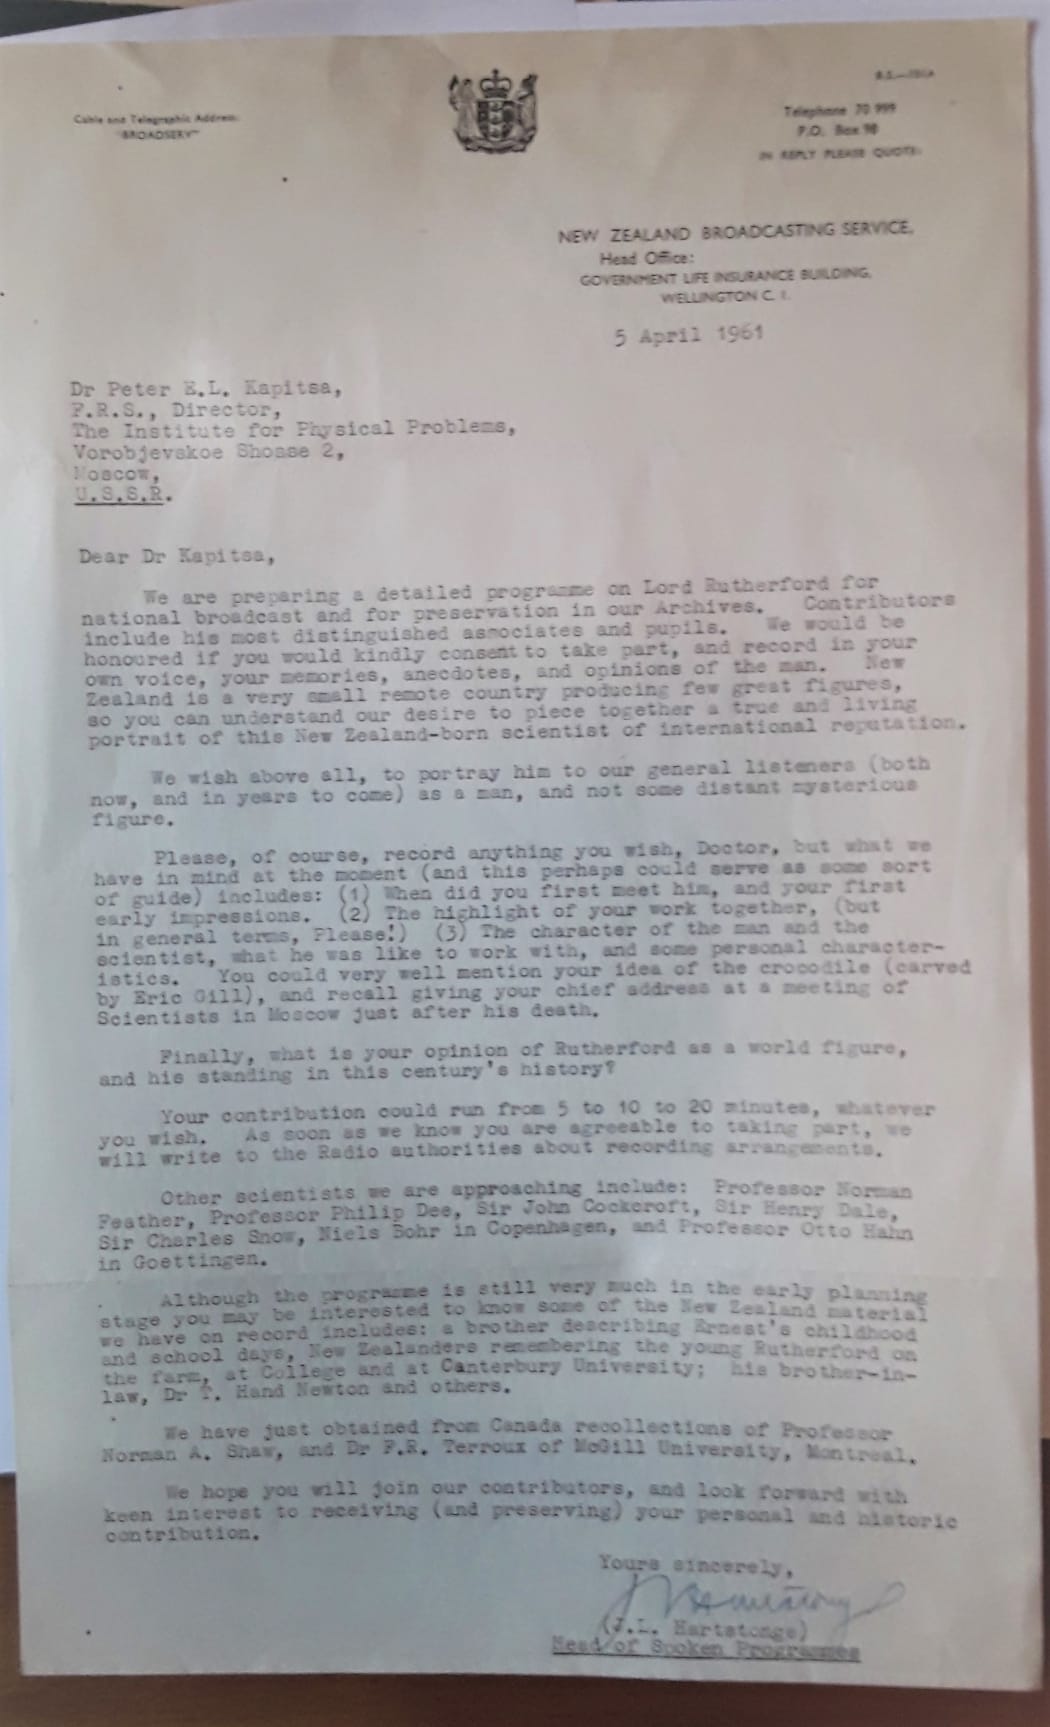 A letter from the New Zealand Broadcasting Service (J.L.Hartstonge, Head of Spoken Programmes) dated 1961 and addressed to one of the Russian students of Rutherford - Pyotr Kapitsa